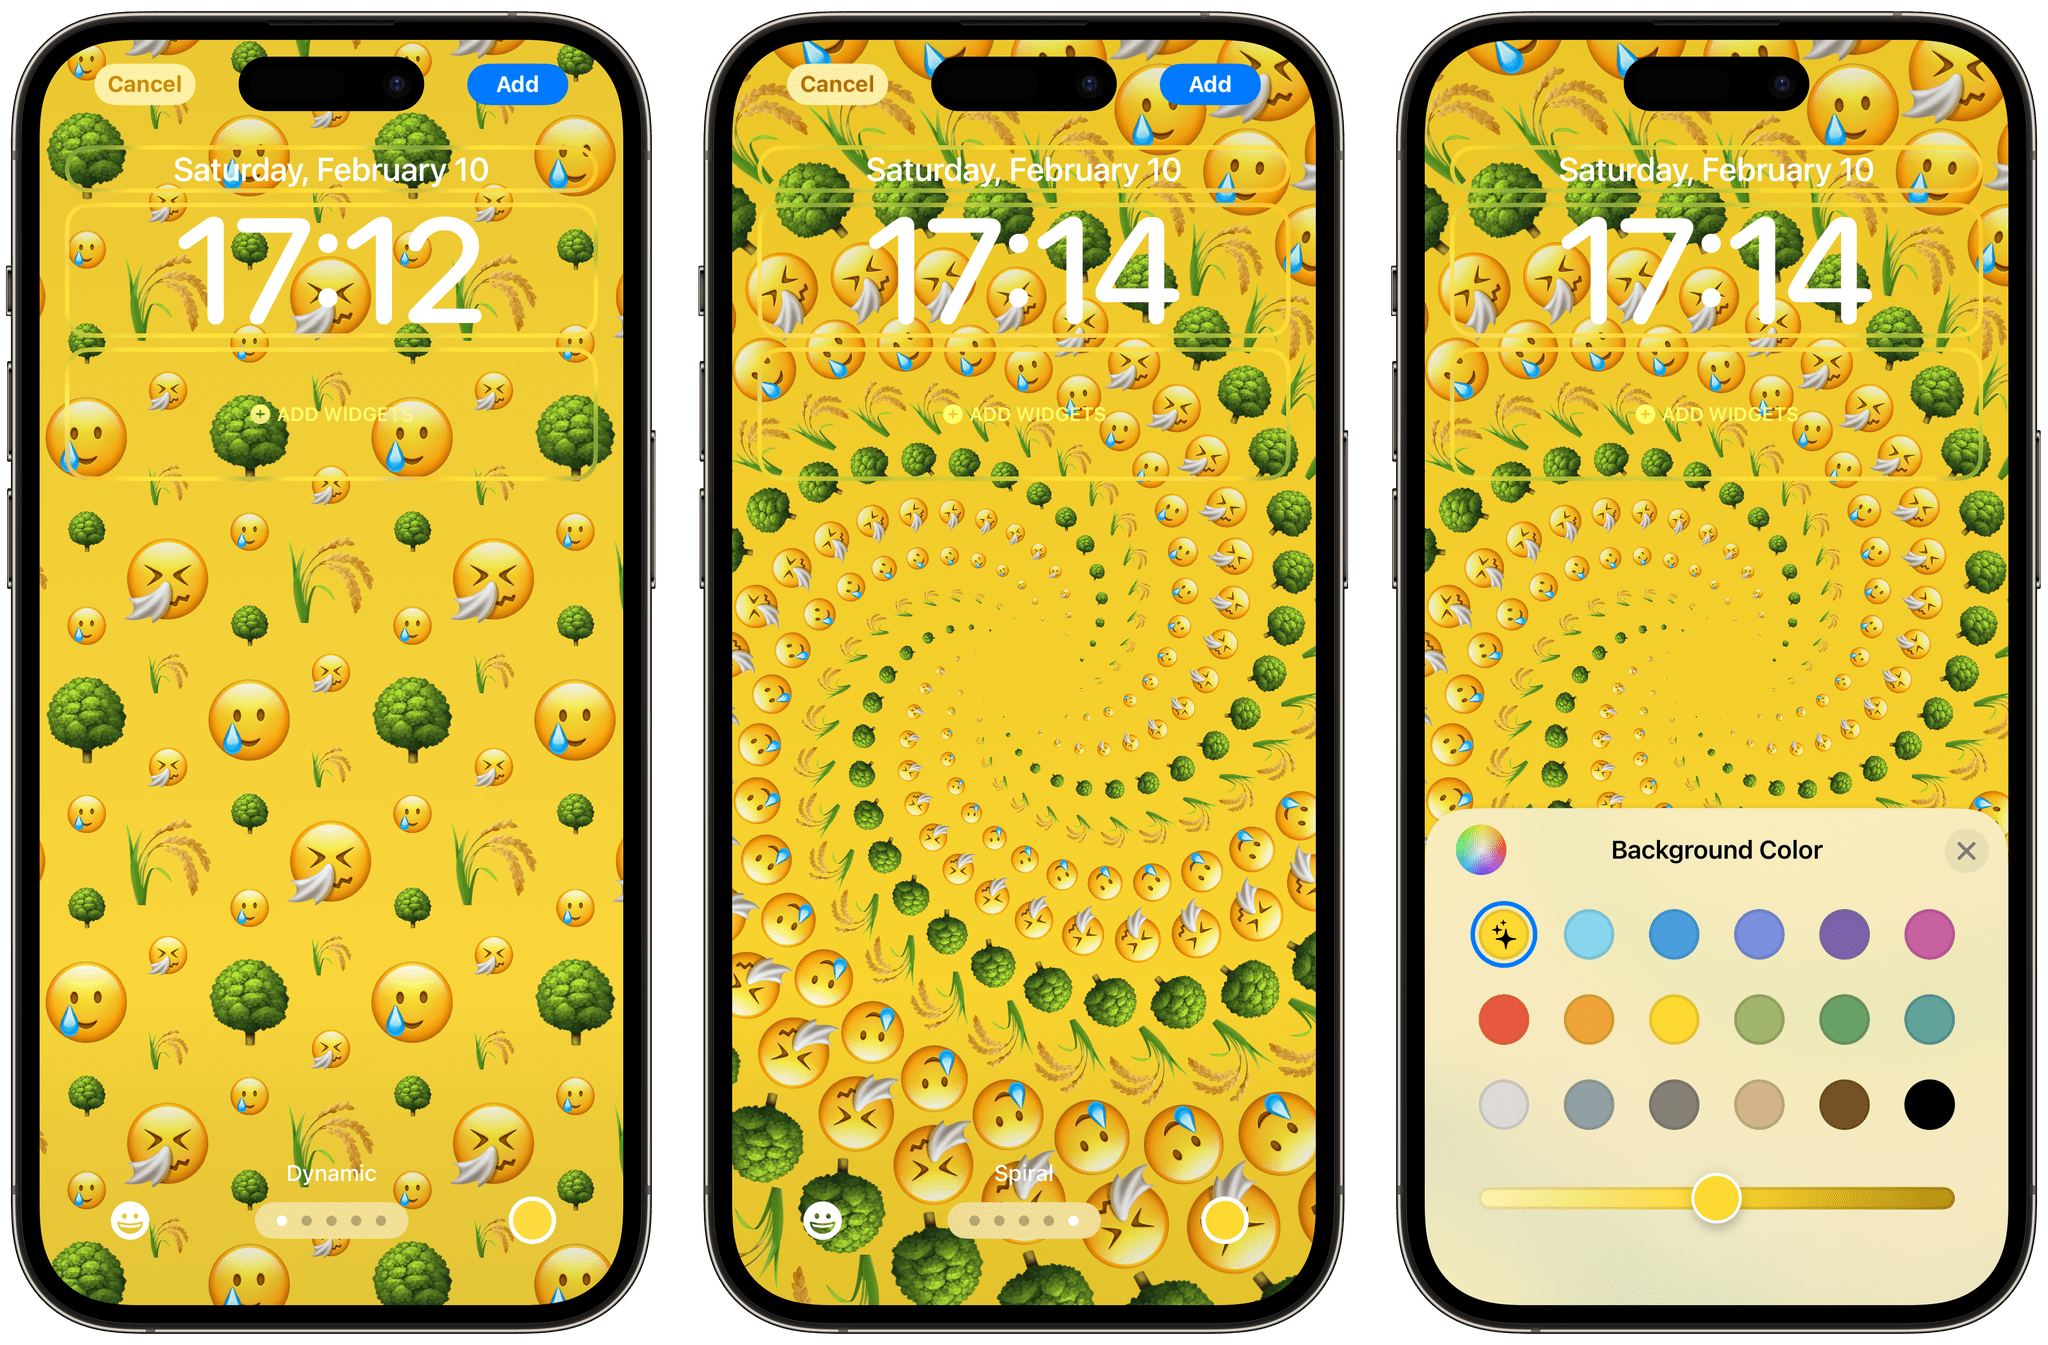 Creating the perfect representation of my spring allergies with Apple's emoji wallpaper on the iPhone.